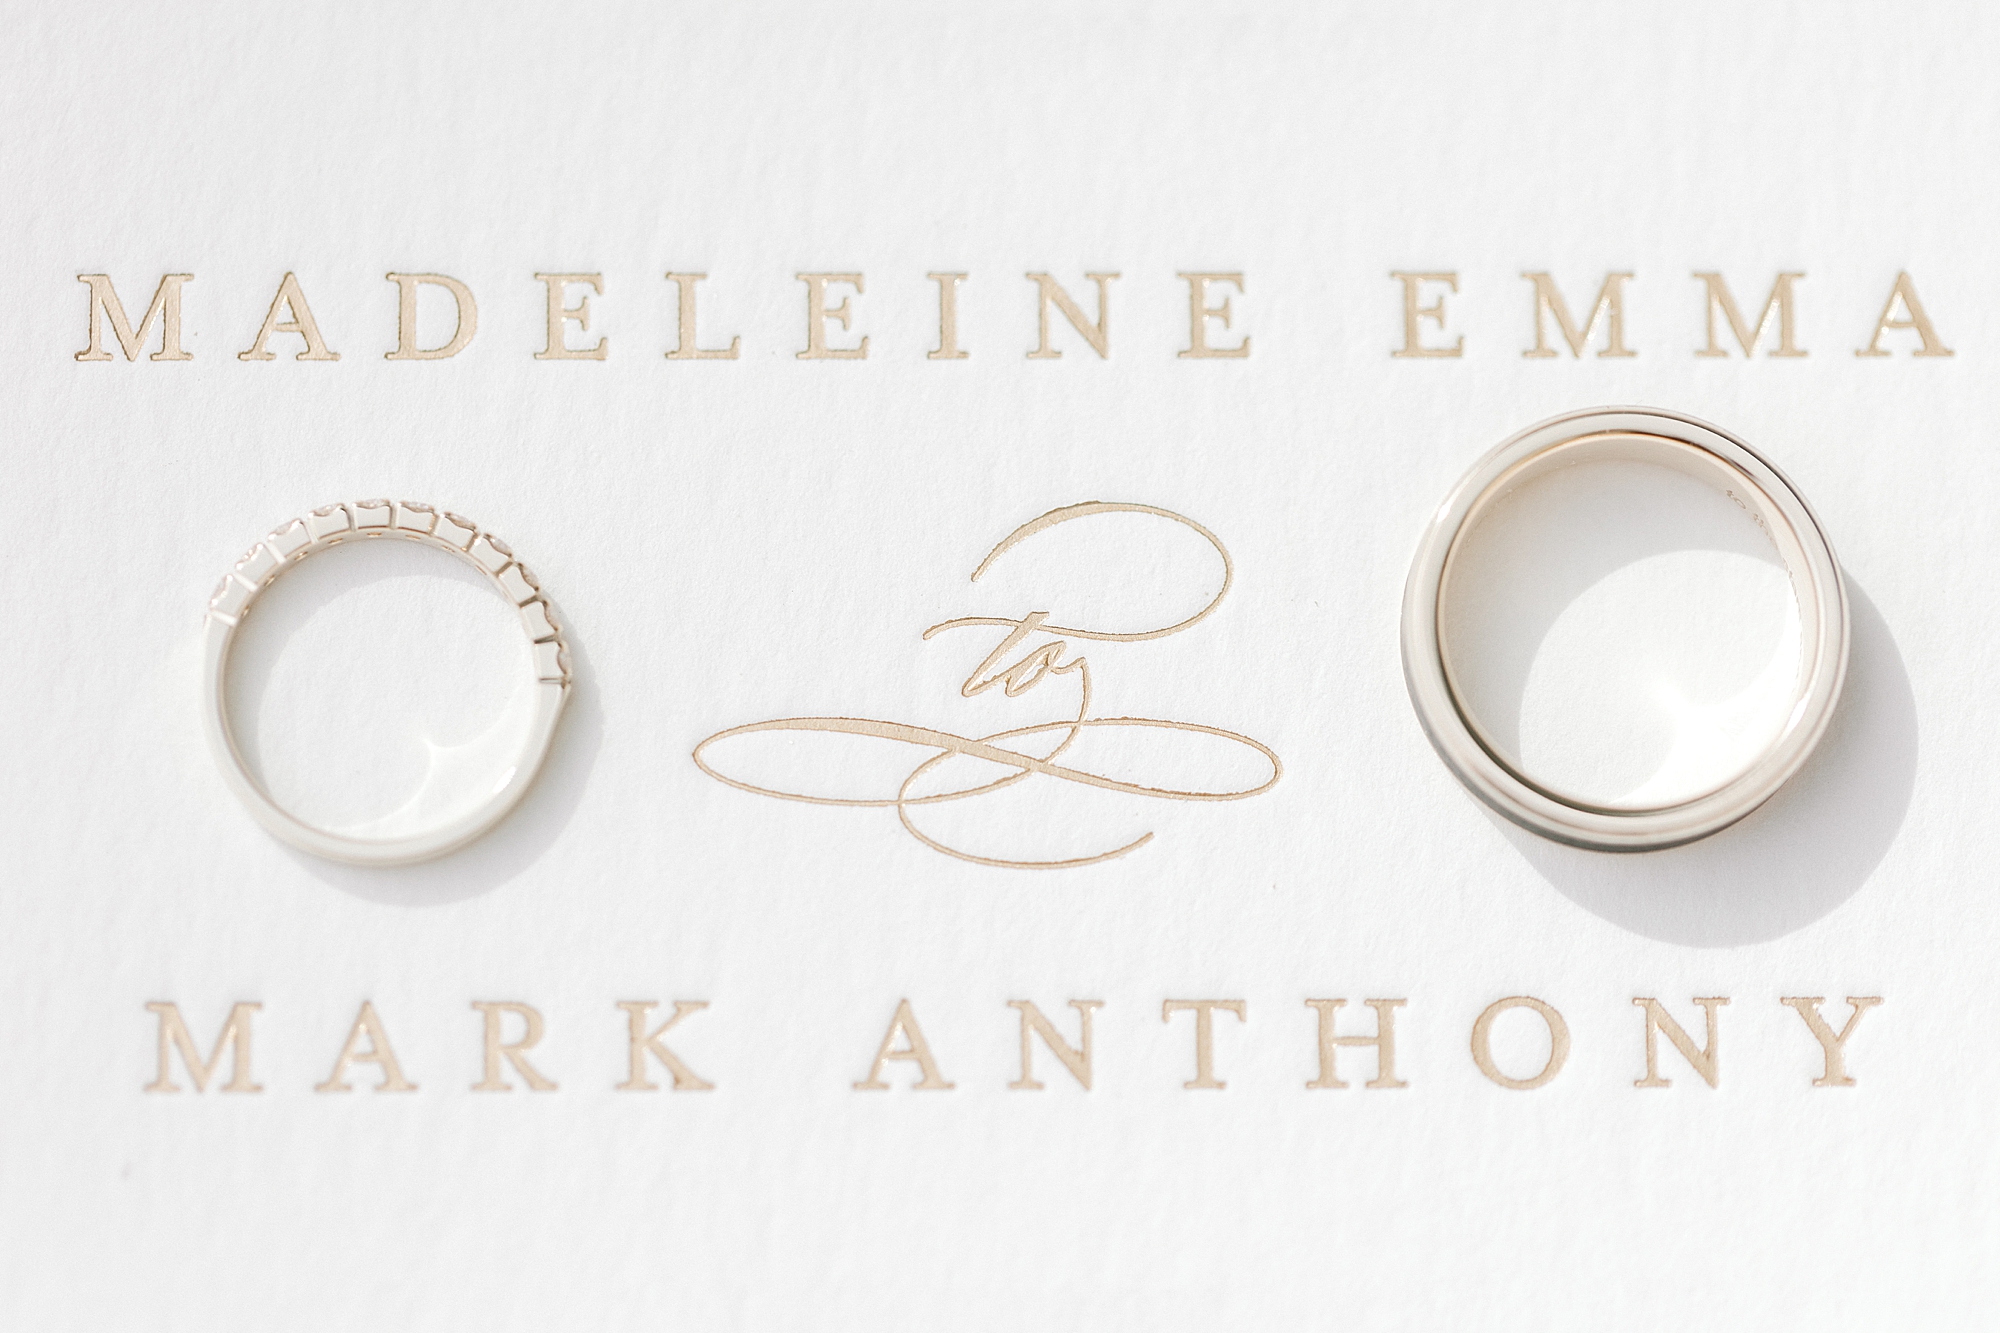 stationery set with gold rings for NJ wedding day